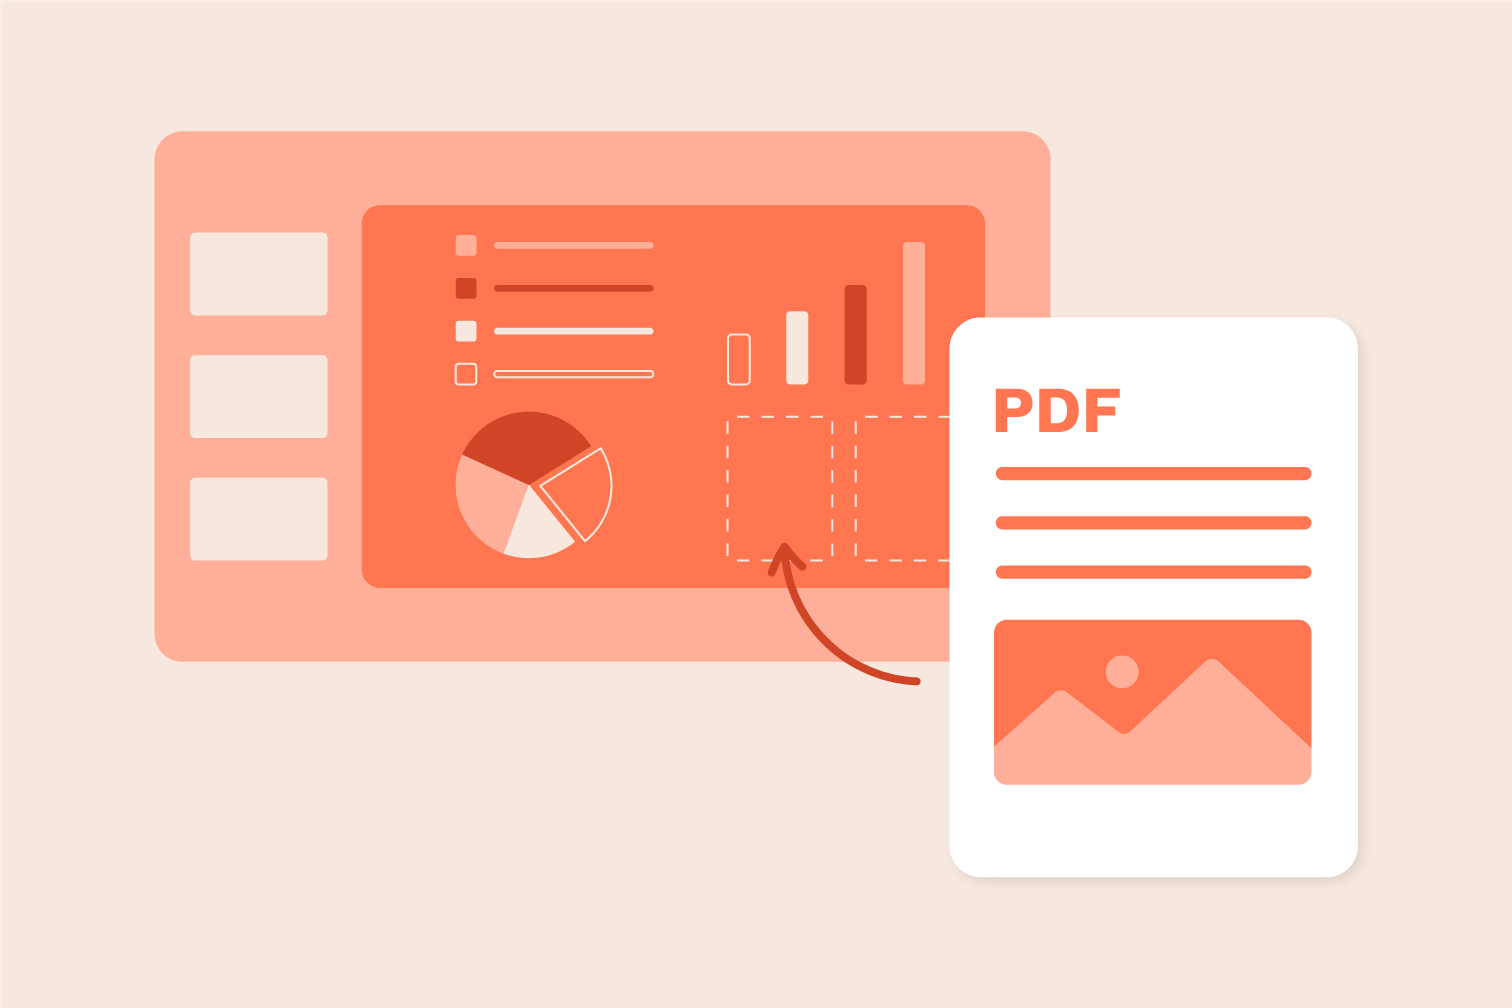 How to insert a PDF into a PowerPoint 